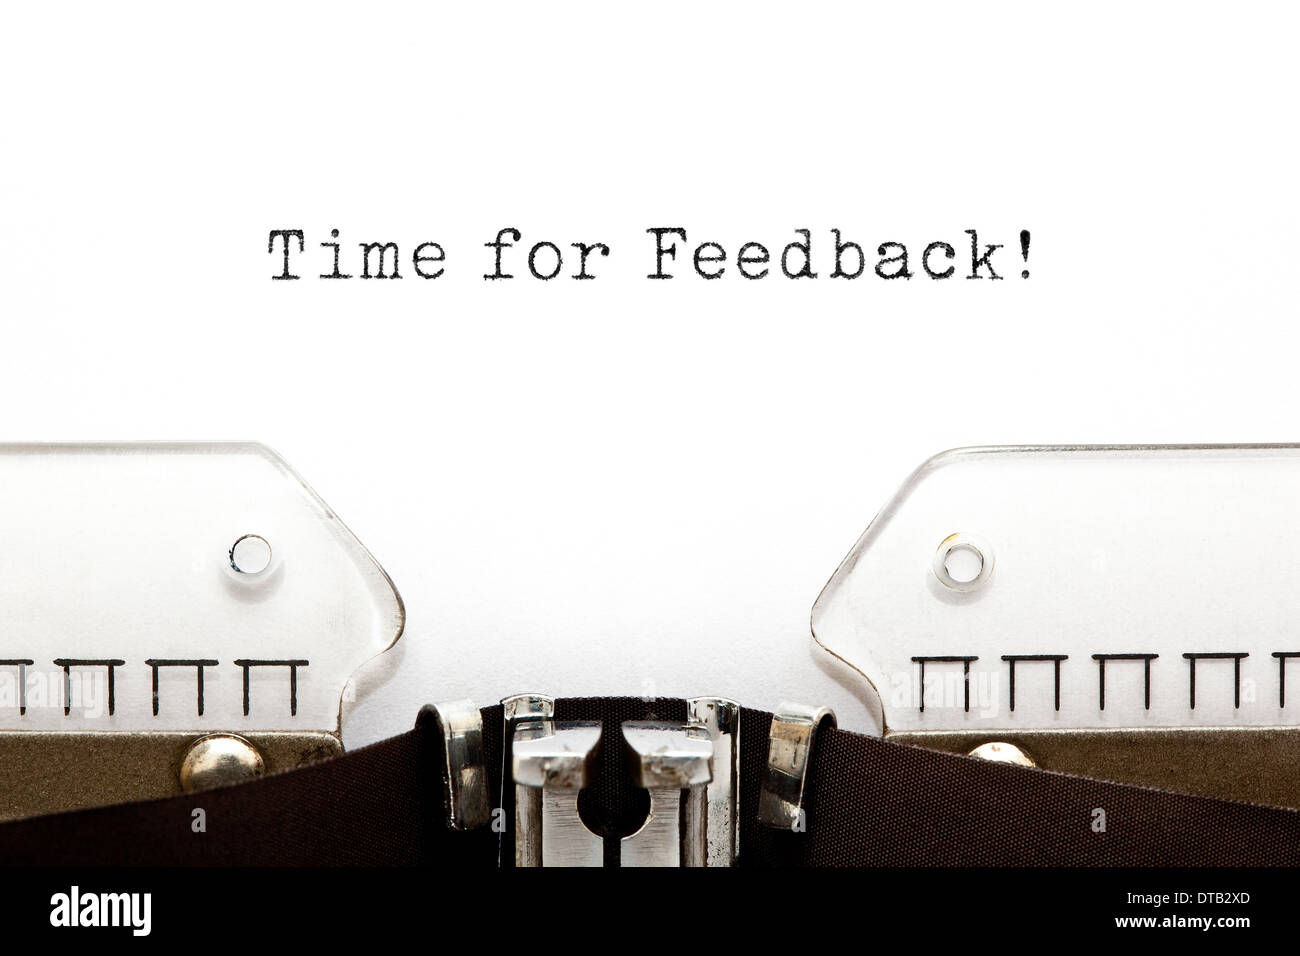 Time for Feedback printed on an old typewriter. Stock Photo